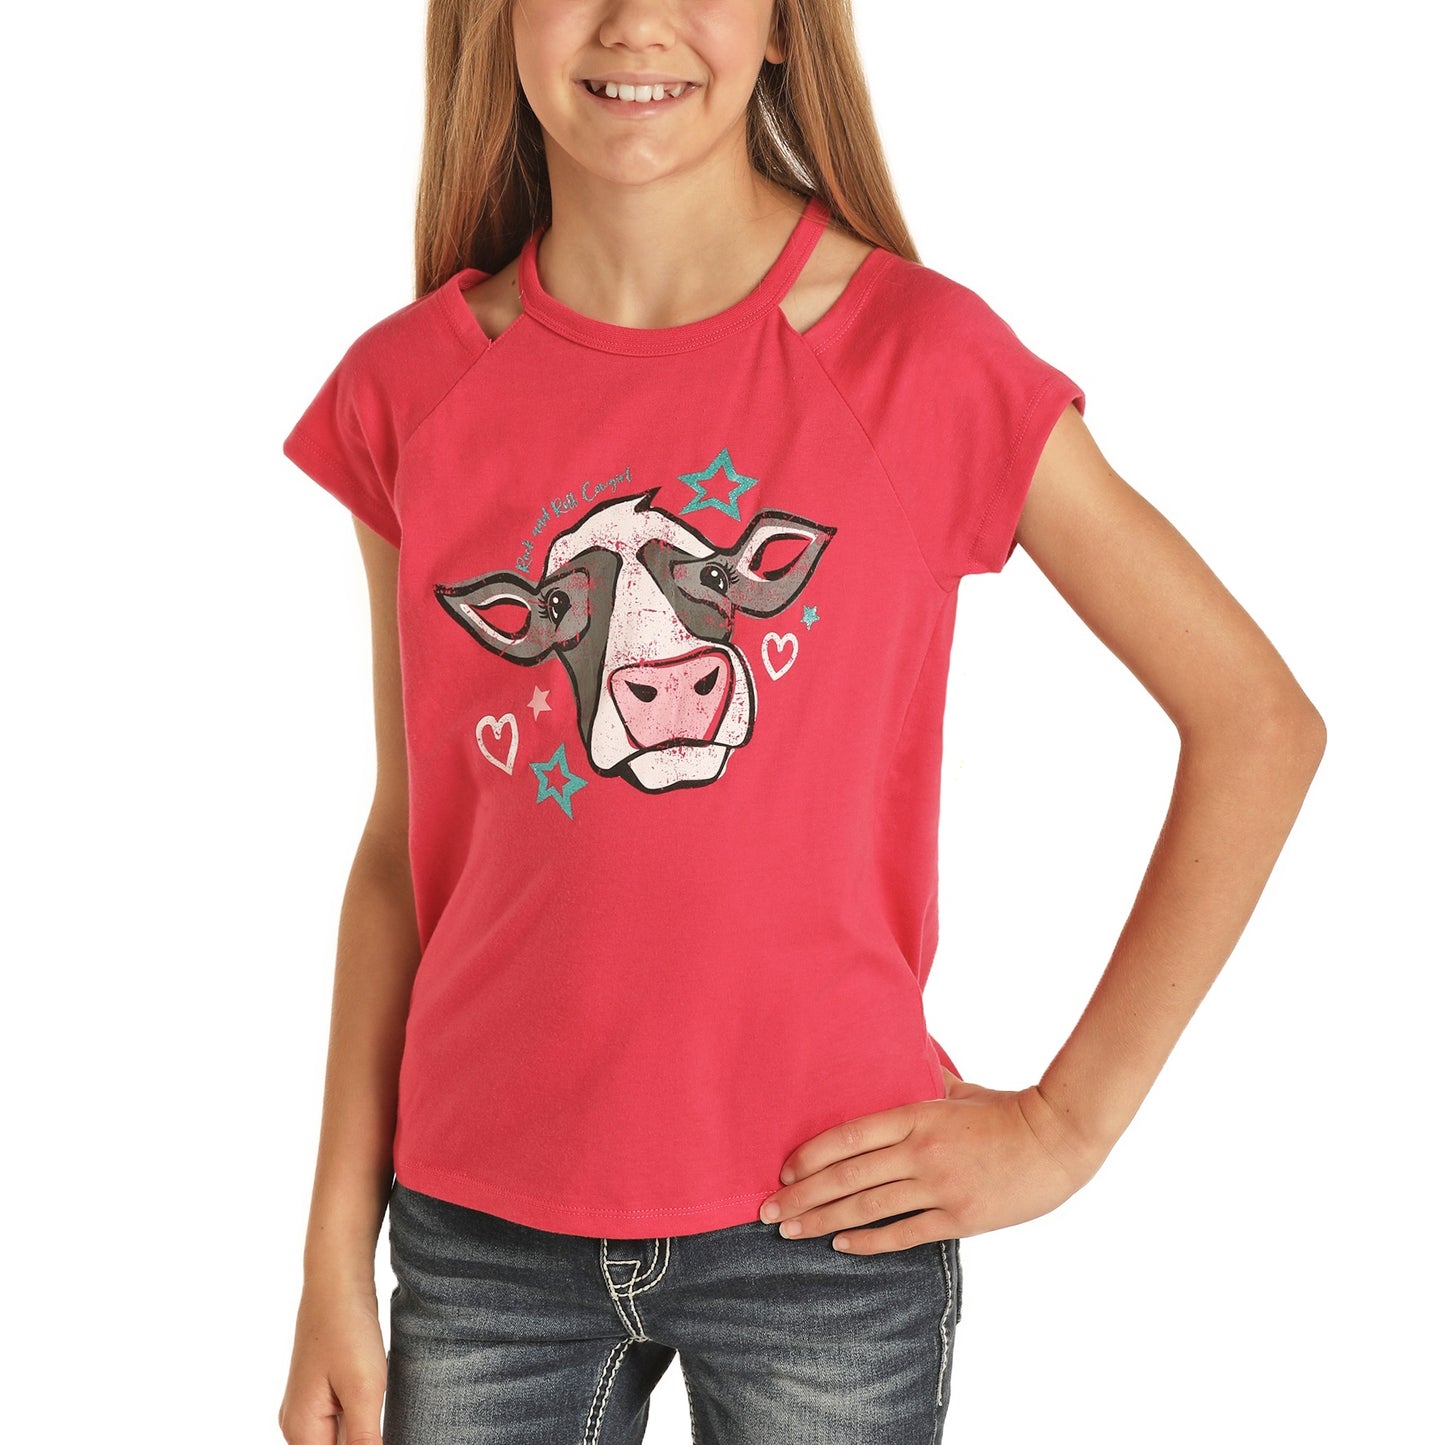 Rock & Roll Cowgirl Children's Cow Graphic Pink T-Shirt G3T8121